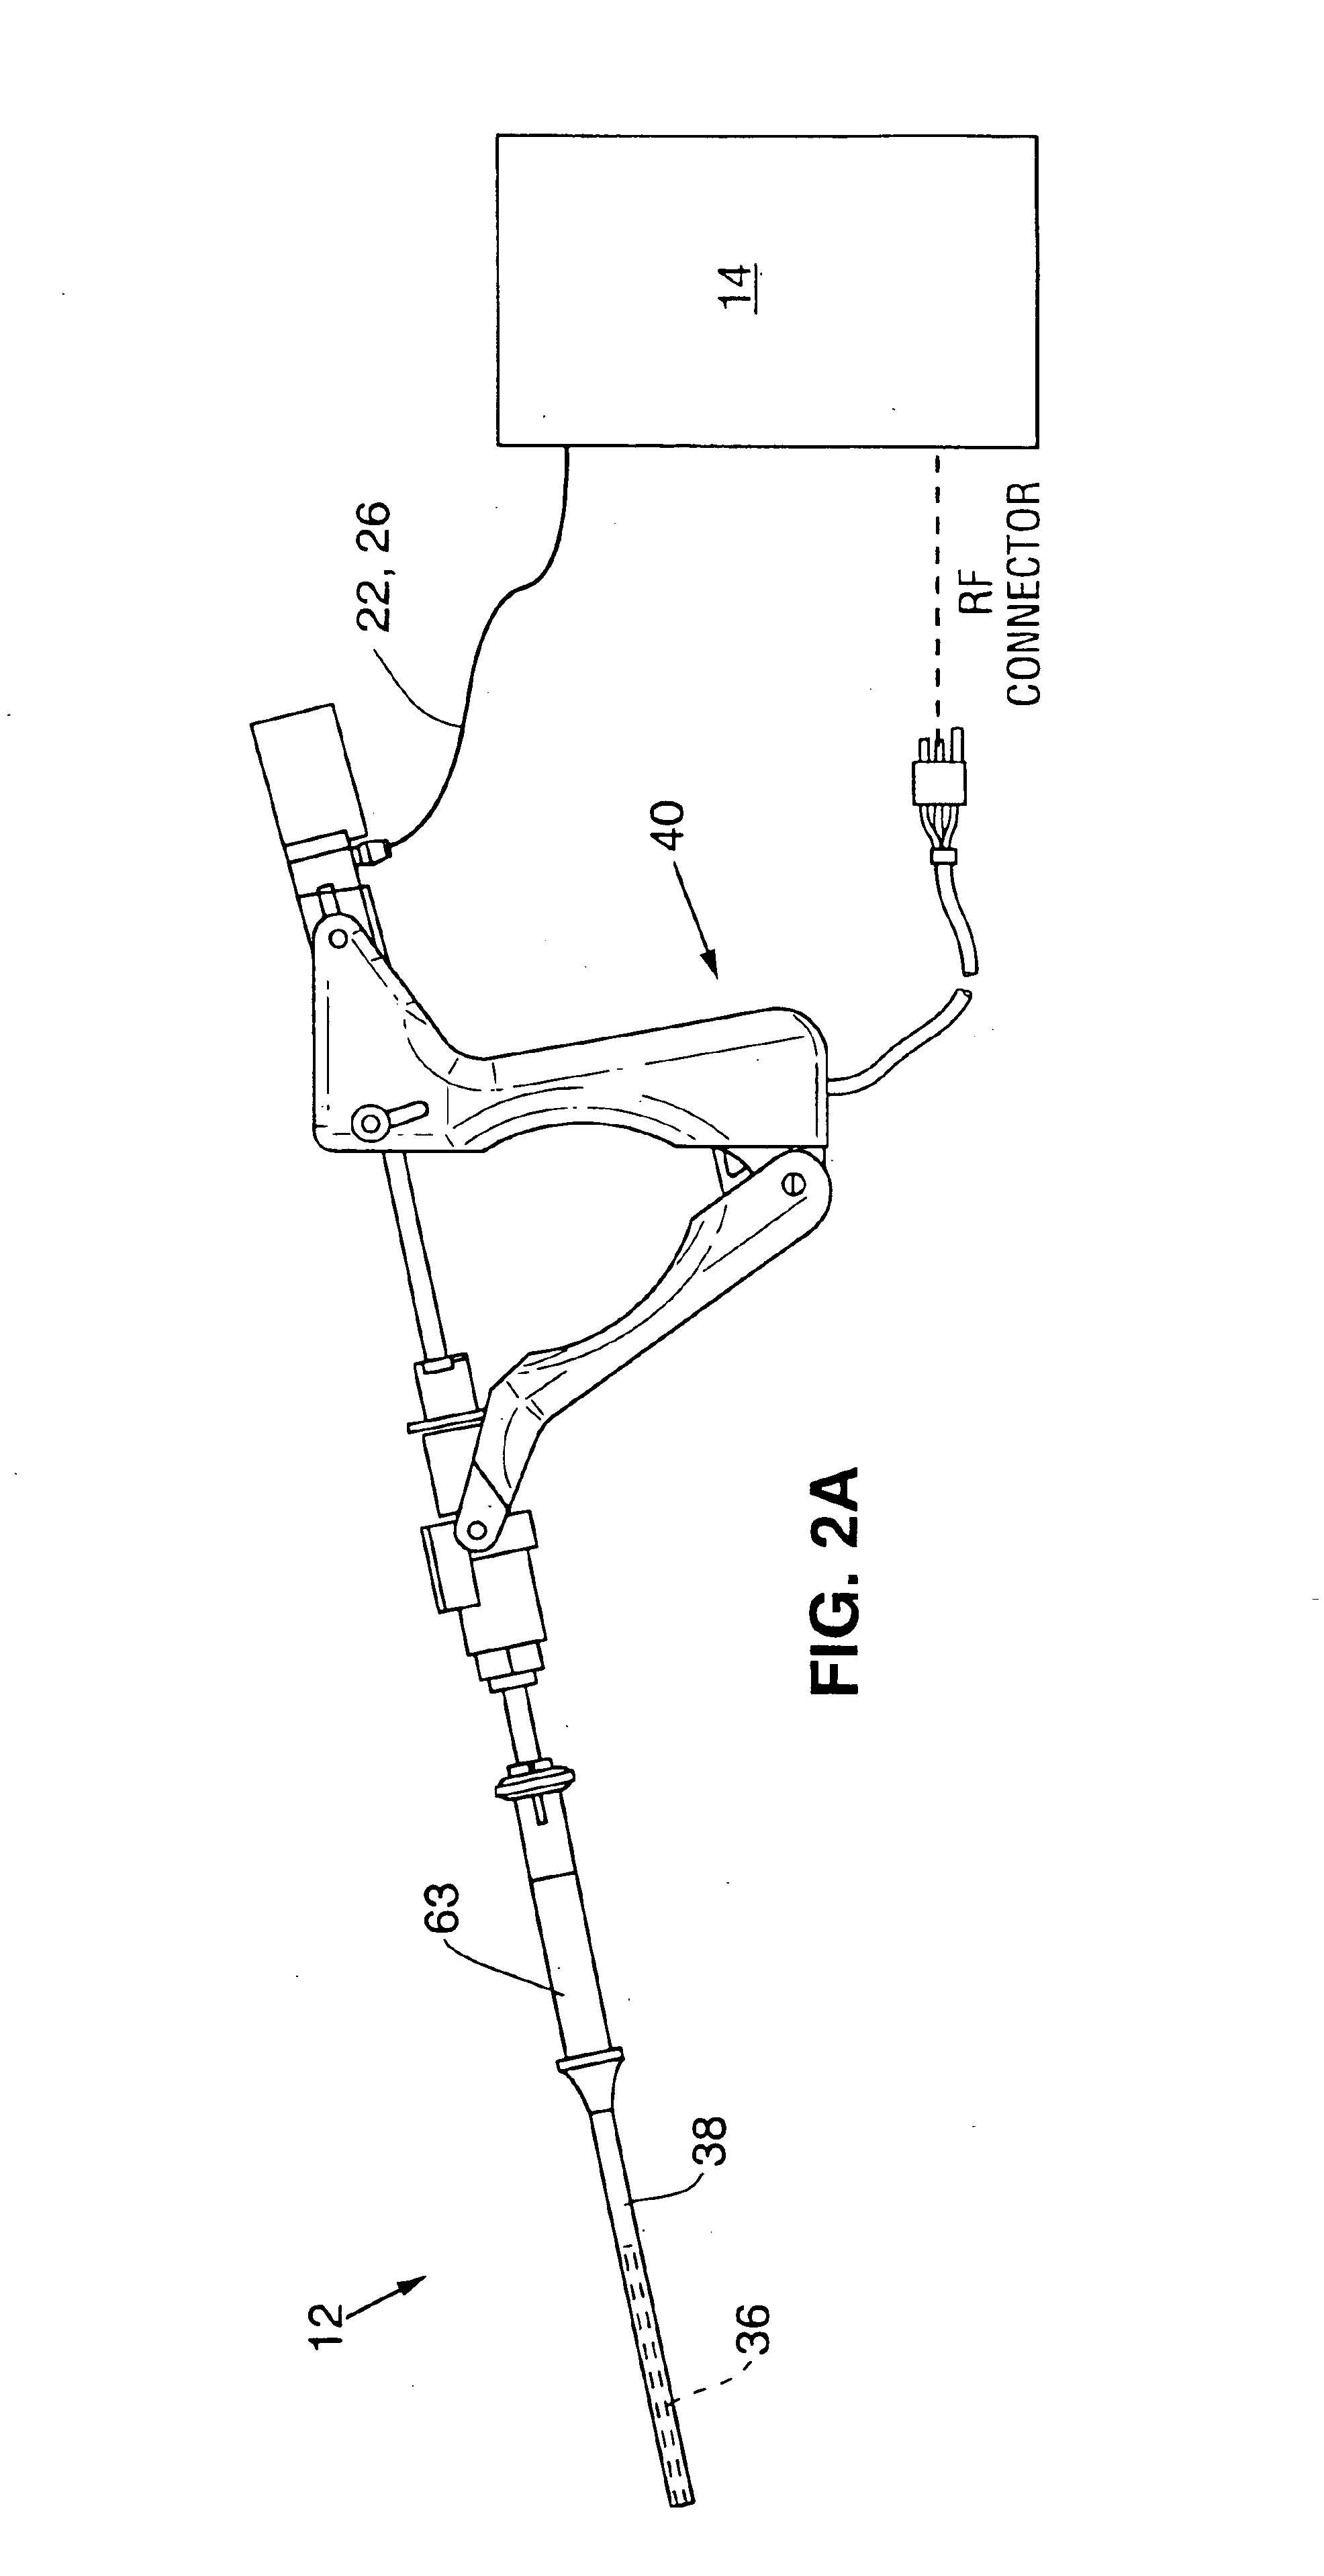 System and method for detecting perforations in a body cavity